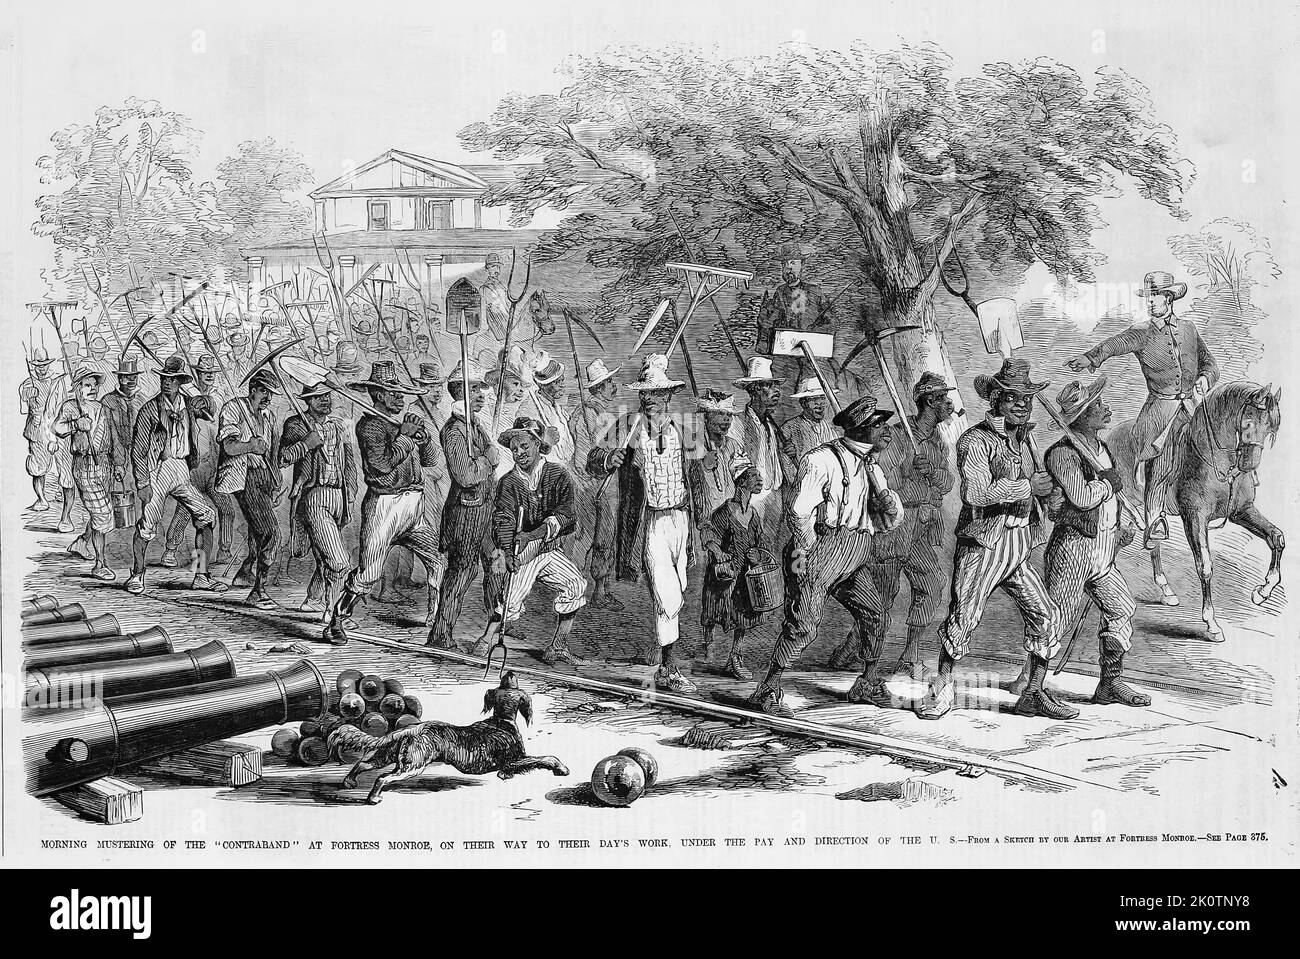 Morning mustering of the 'contraband' at Fort Monroe, Virginia, on their way to their day's work, under the pay and direction of the U.S. October 1861. 19th century American Civil War illustration from Frank Leslie's Illustrated Newspaper Stock Photo